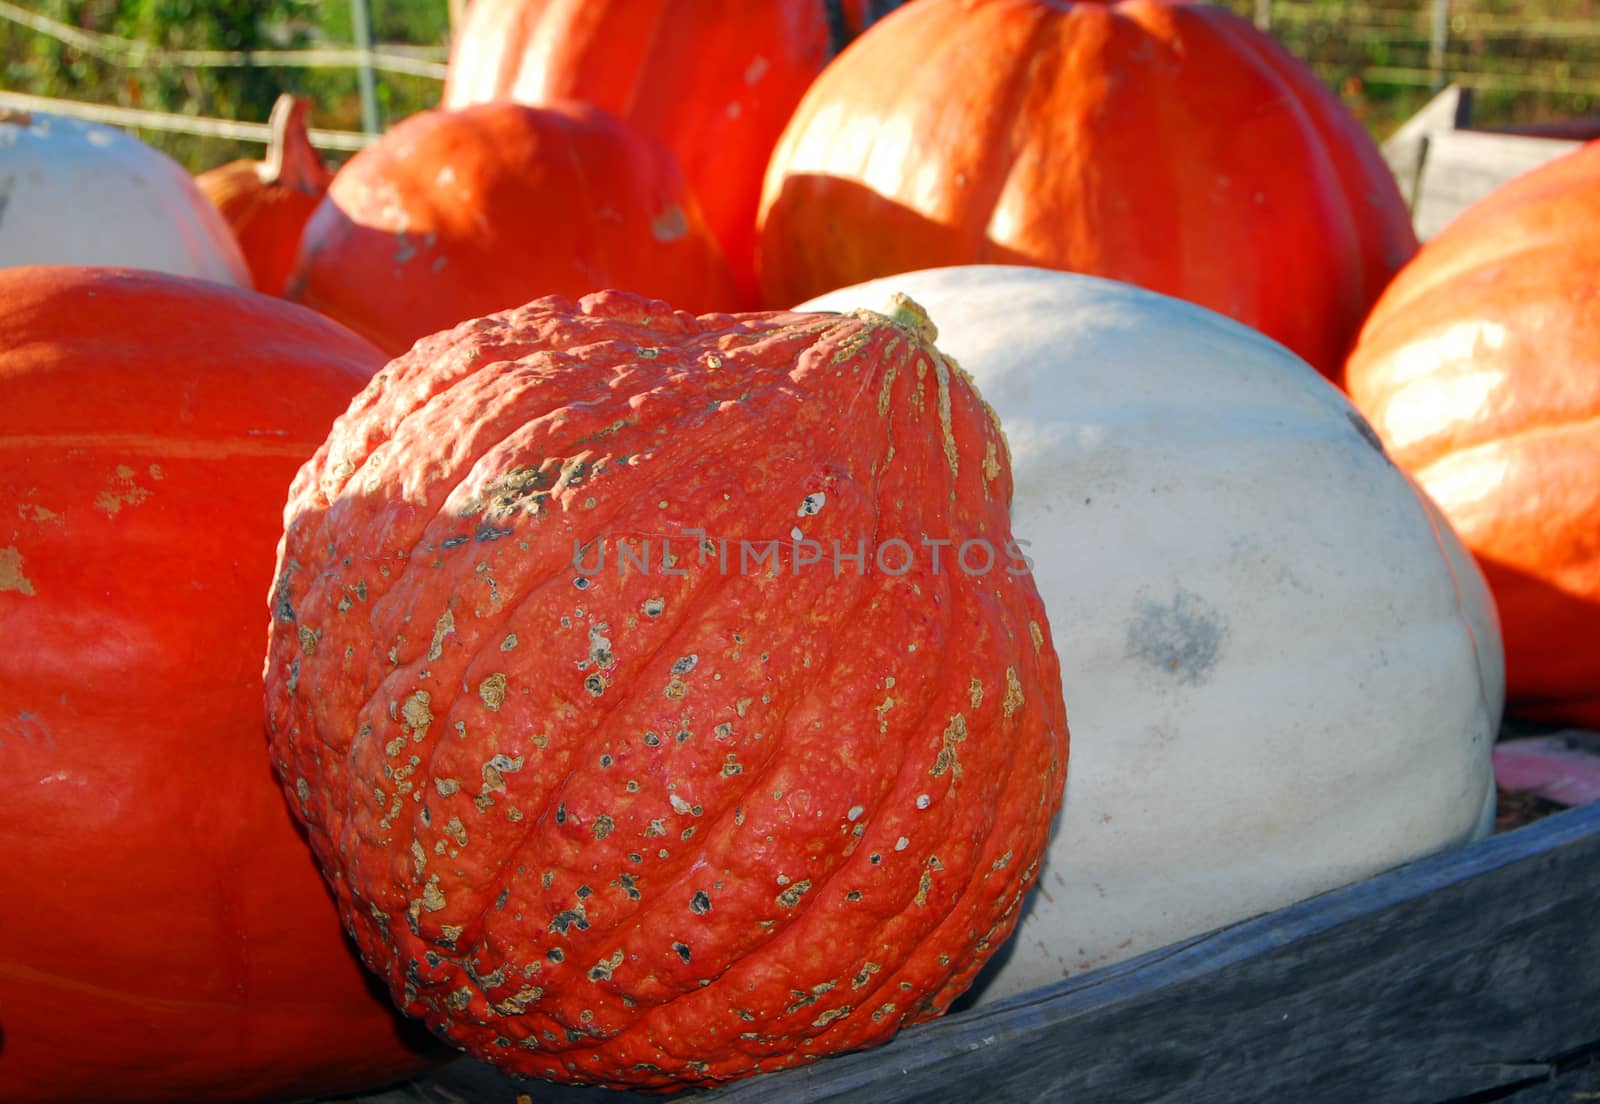 pumpkin fruit for cooking and halloween decoration